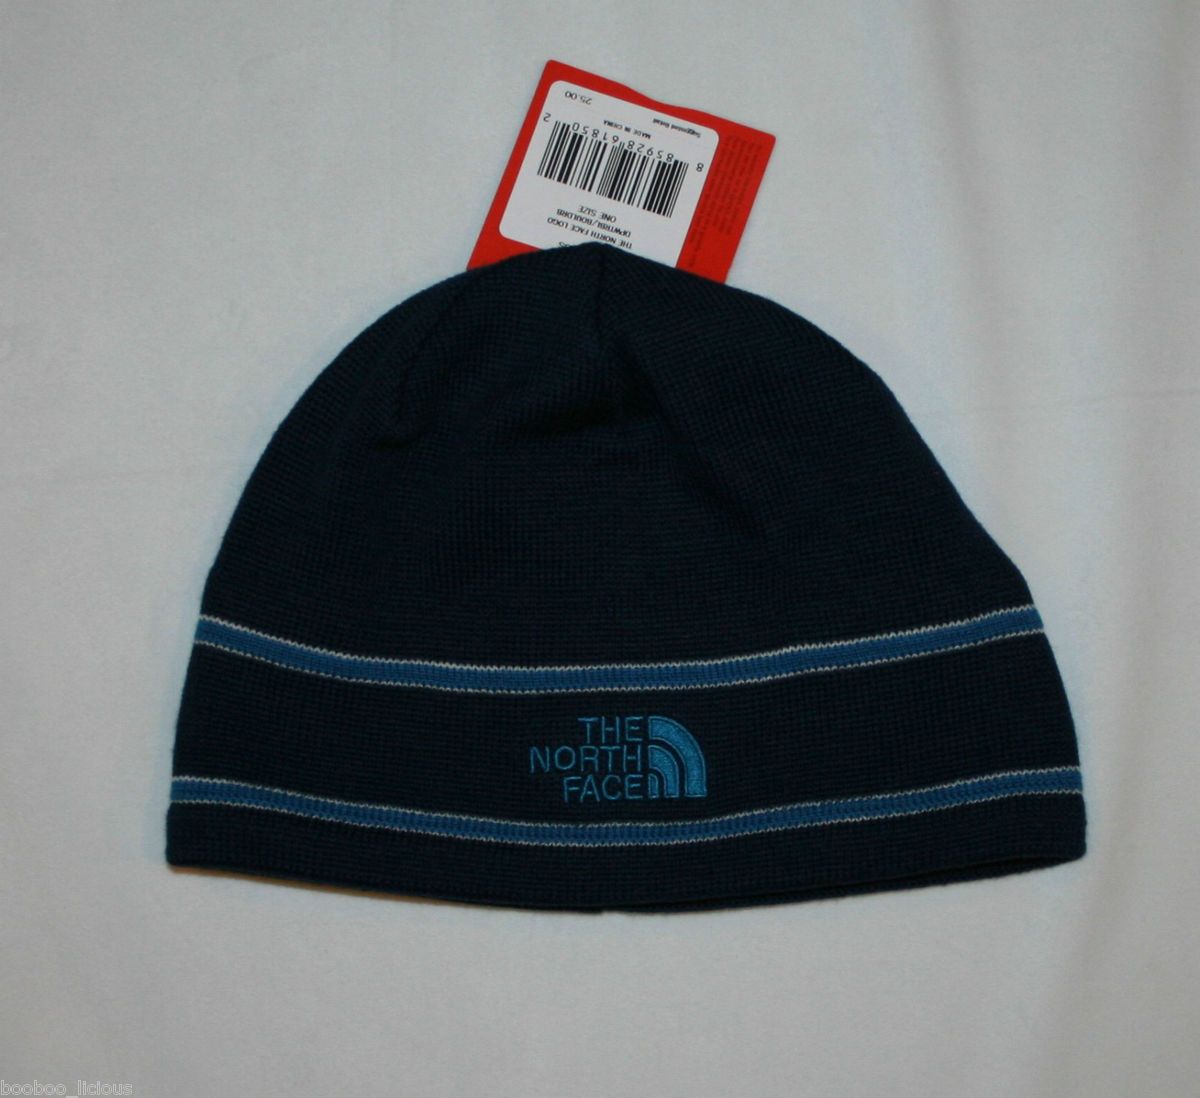 THE NORTH FACE LOGO BEANIE CAP DEEPWATER BLUE NWT ONE SIZE UNISEX